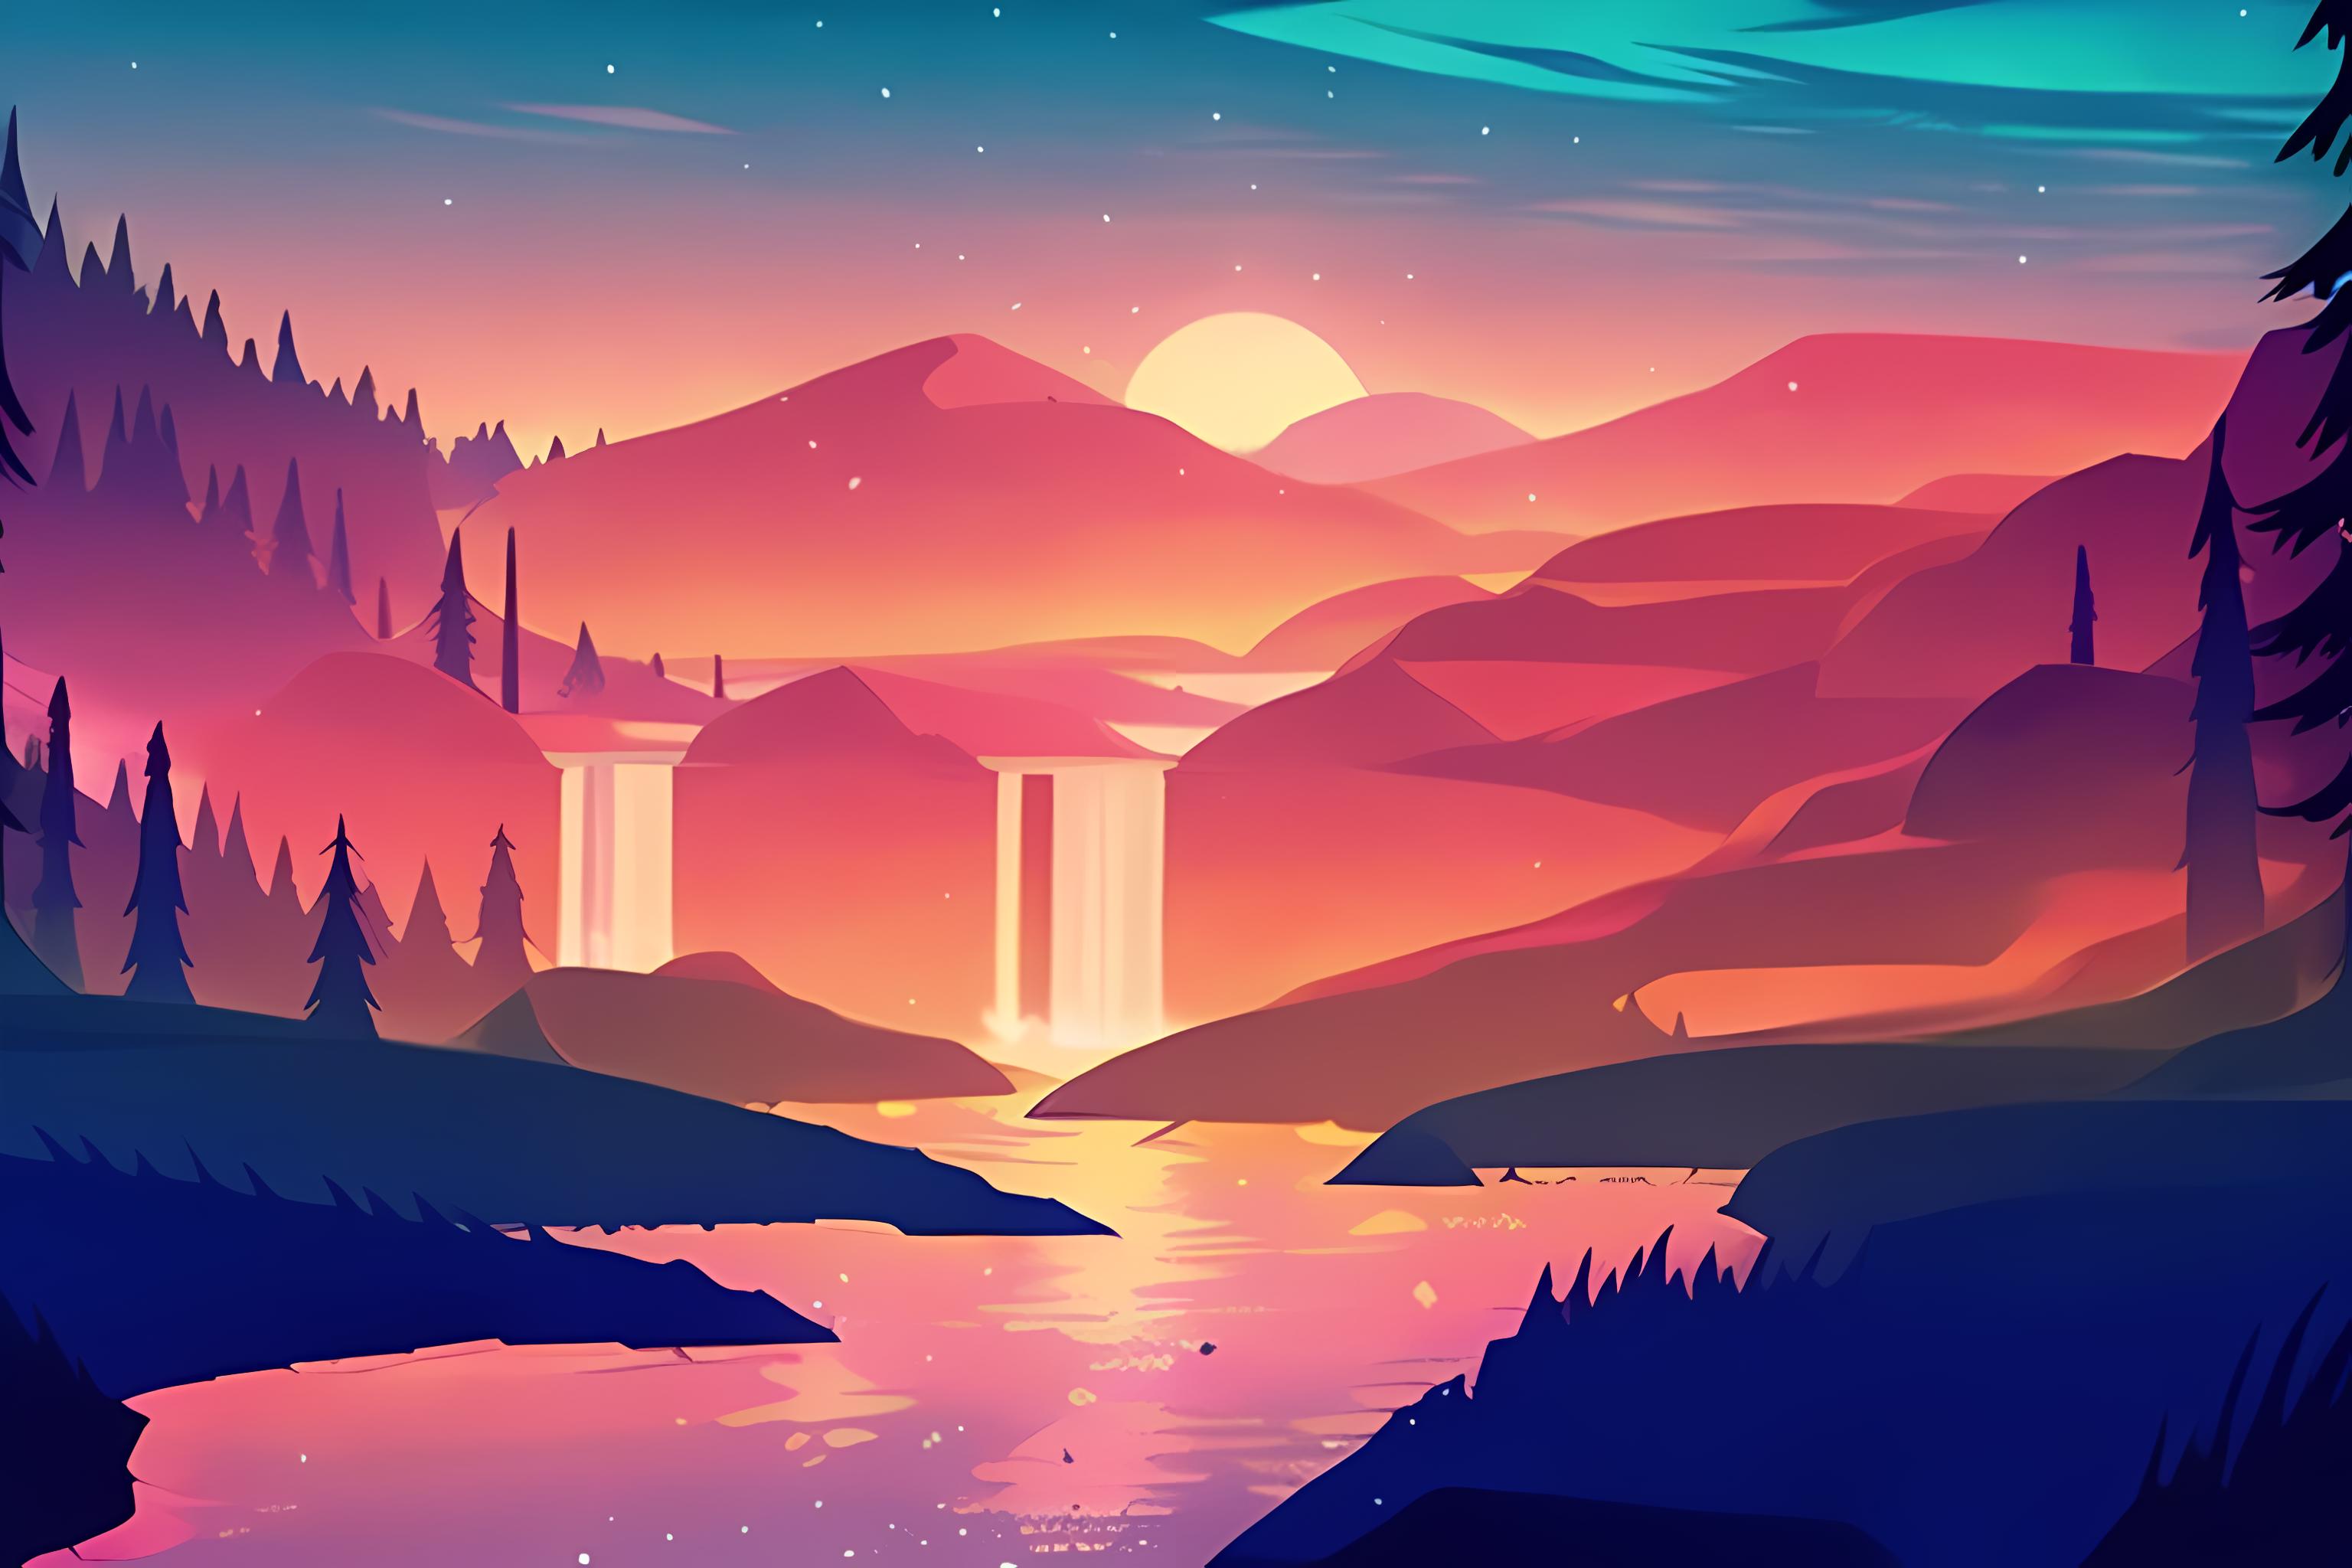 Wallpaper : low poly, mountains, simple 2560x1440 - urbiy - 1353687 - HD  Wallpapers - WallHere